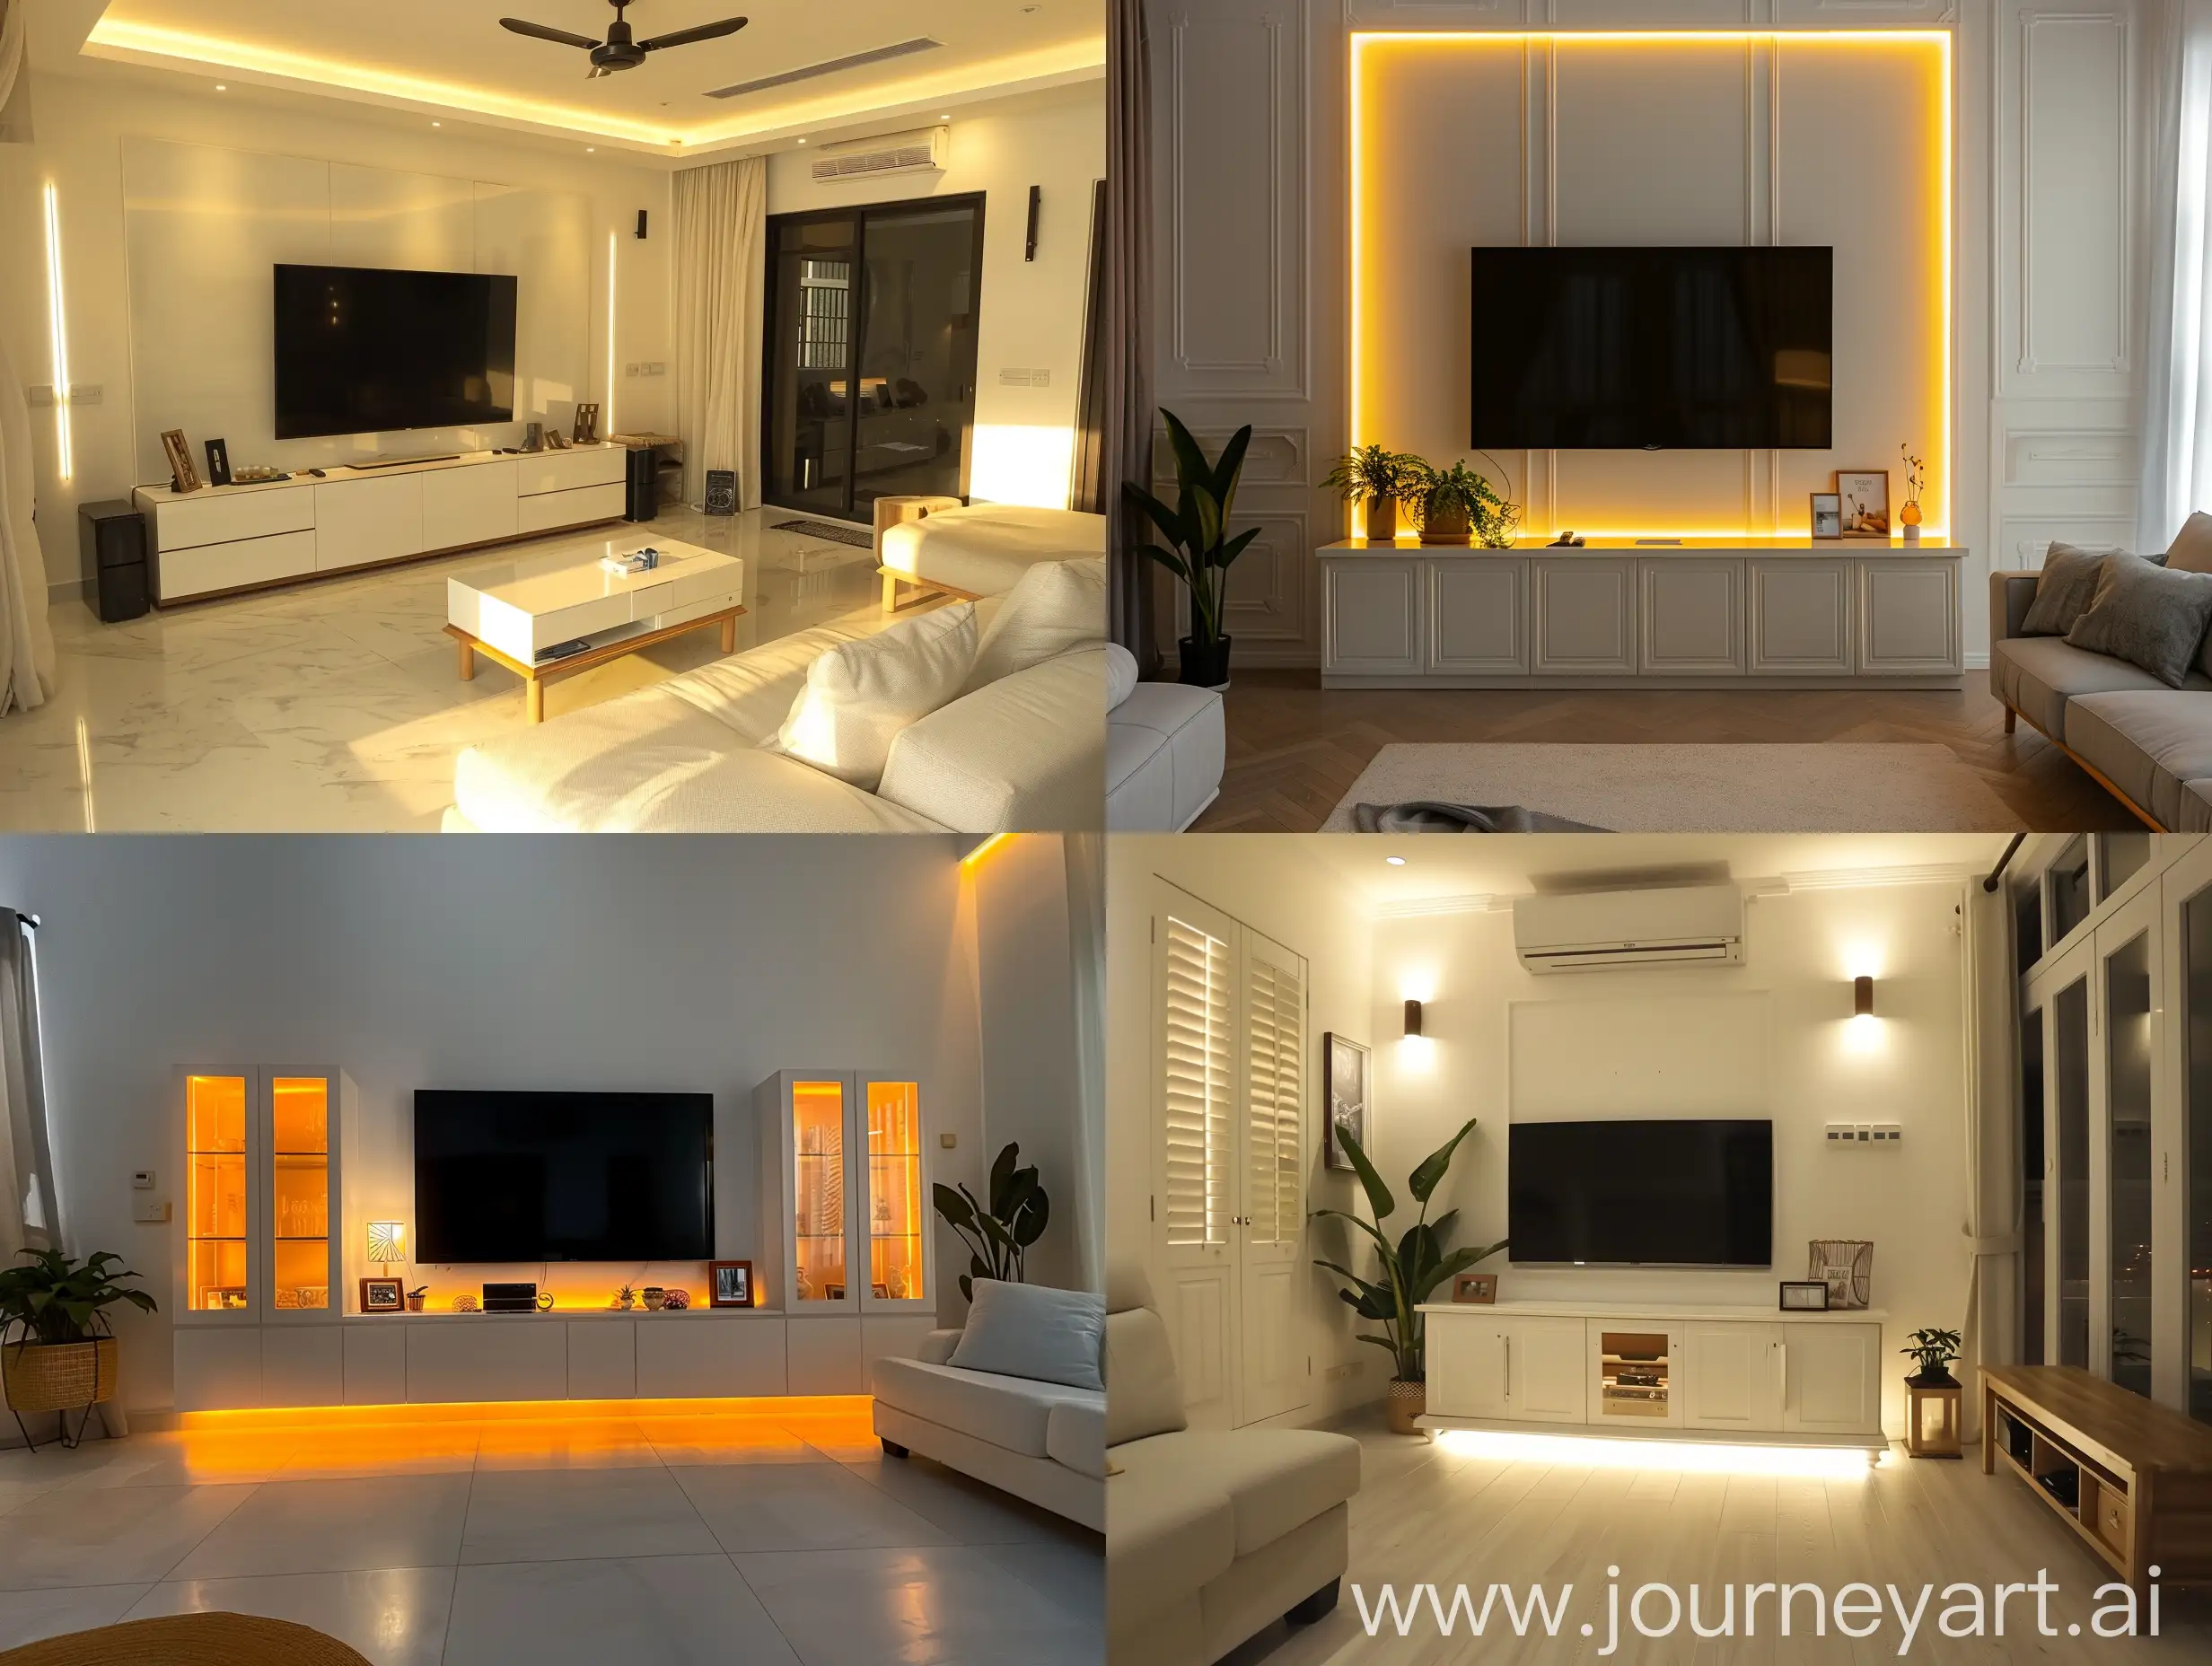 Crate a real interior of living room, white in color and tv cabinet, size of room is 10*30 in fit photo should be hd and minimalistic interior theme photo taken with I phone and hd interior with warm white light with indian minimalistic ik nterior